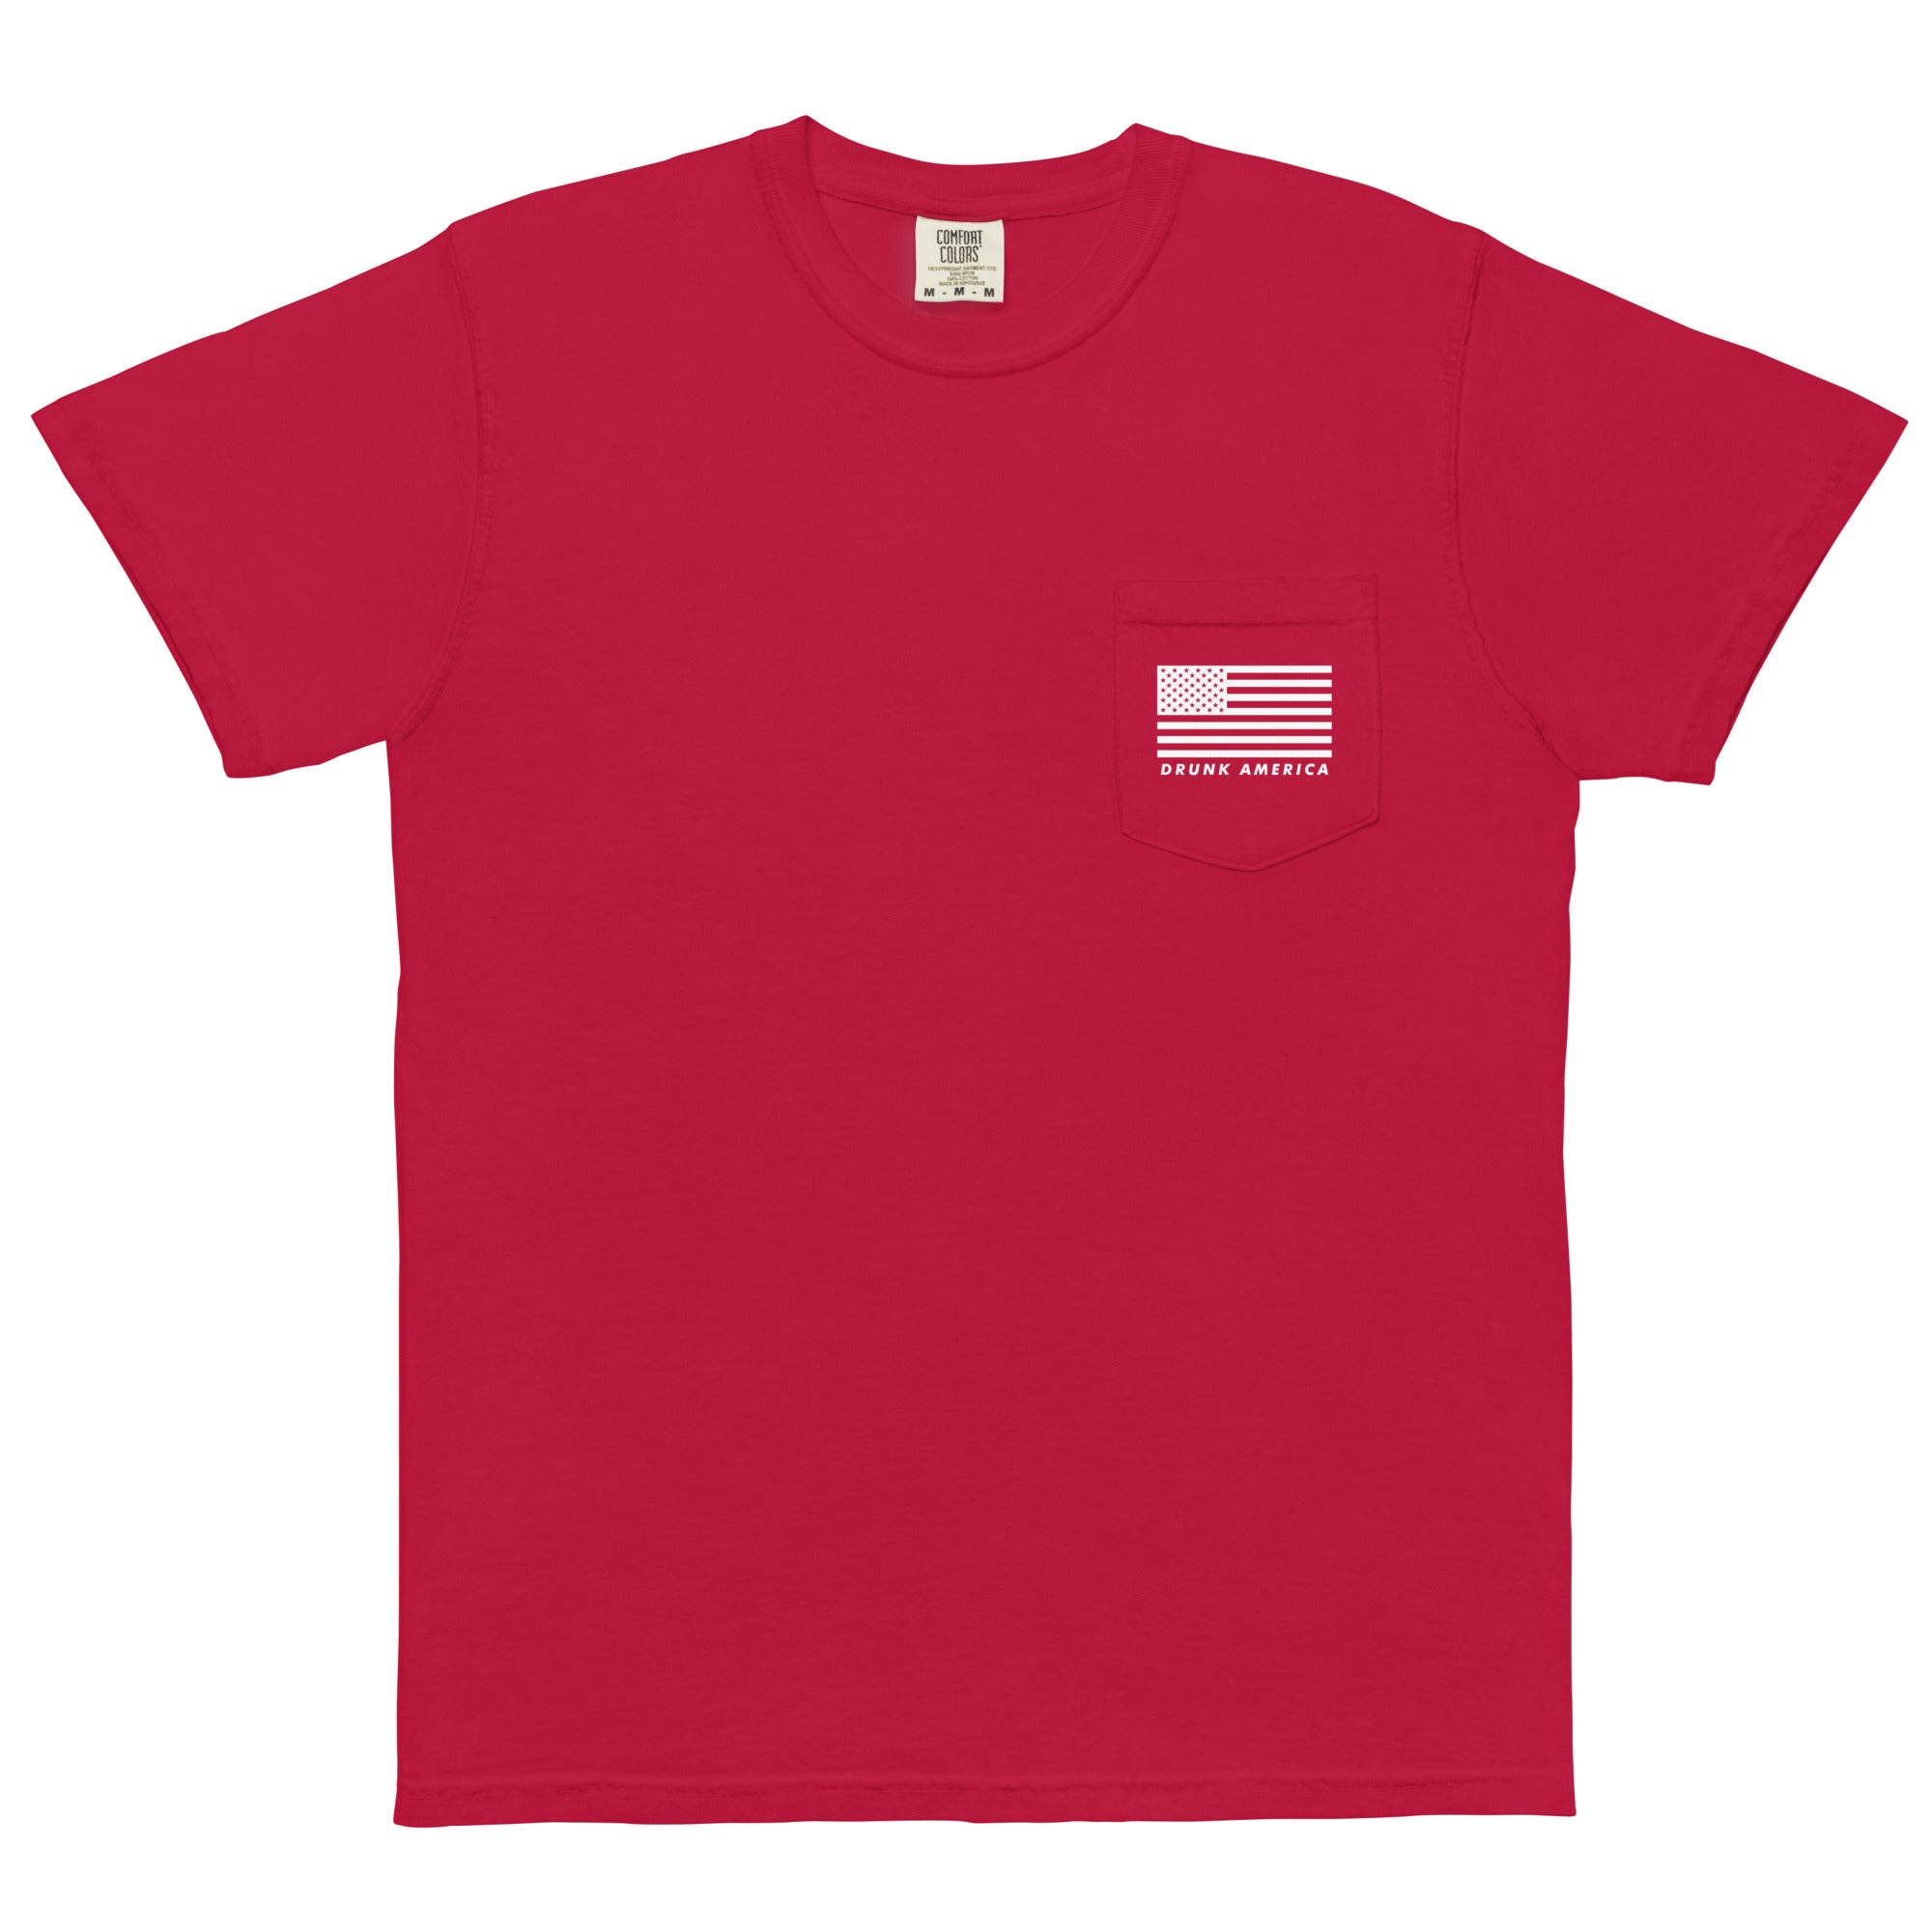 Maga In The Front Ultra MAGA In The Back Comfort Colors Pocket Tee - | Drunk America 